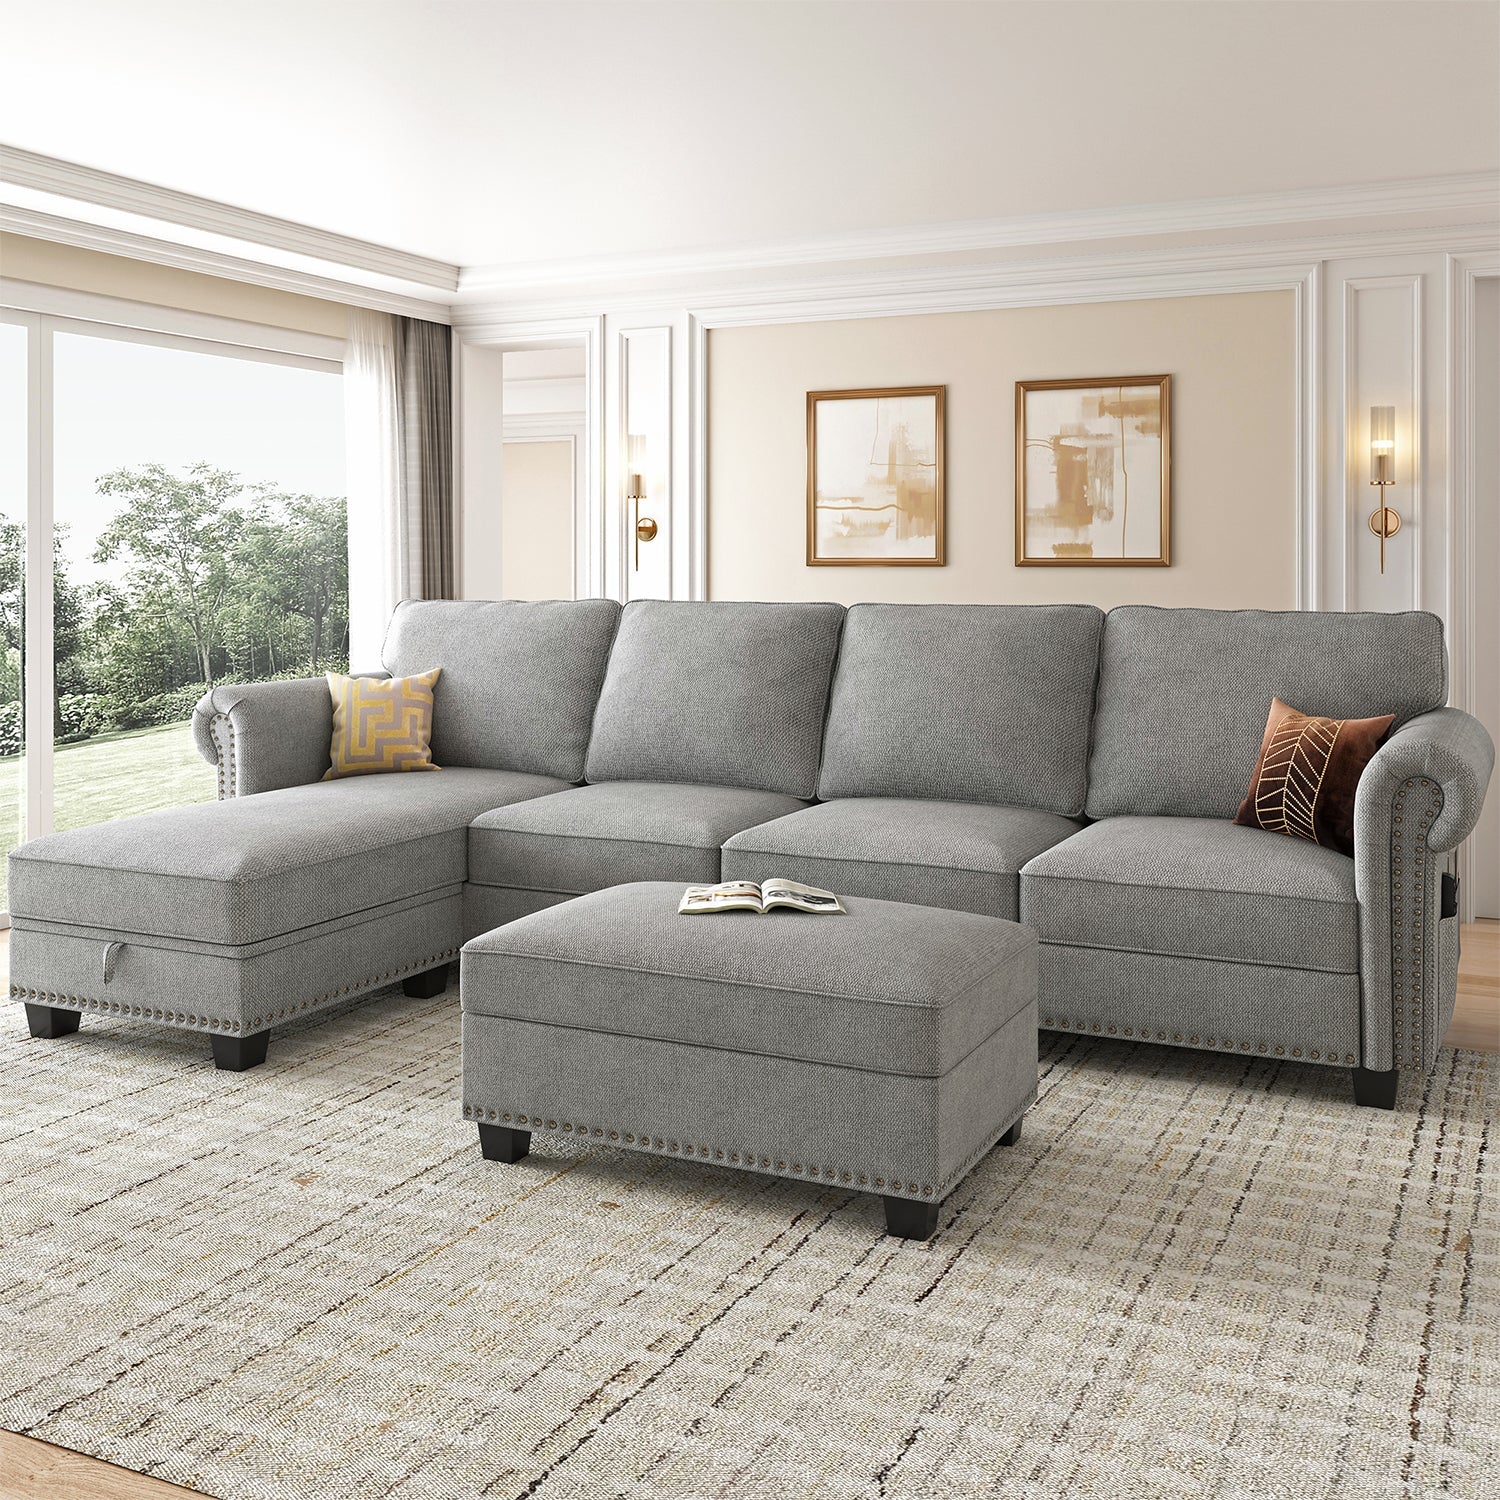 NOLANY 5-Piece Polyester Convertible Sectional With Storage Ottoman